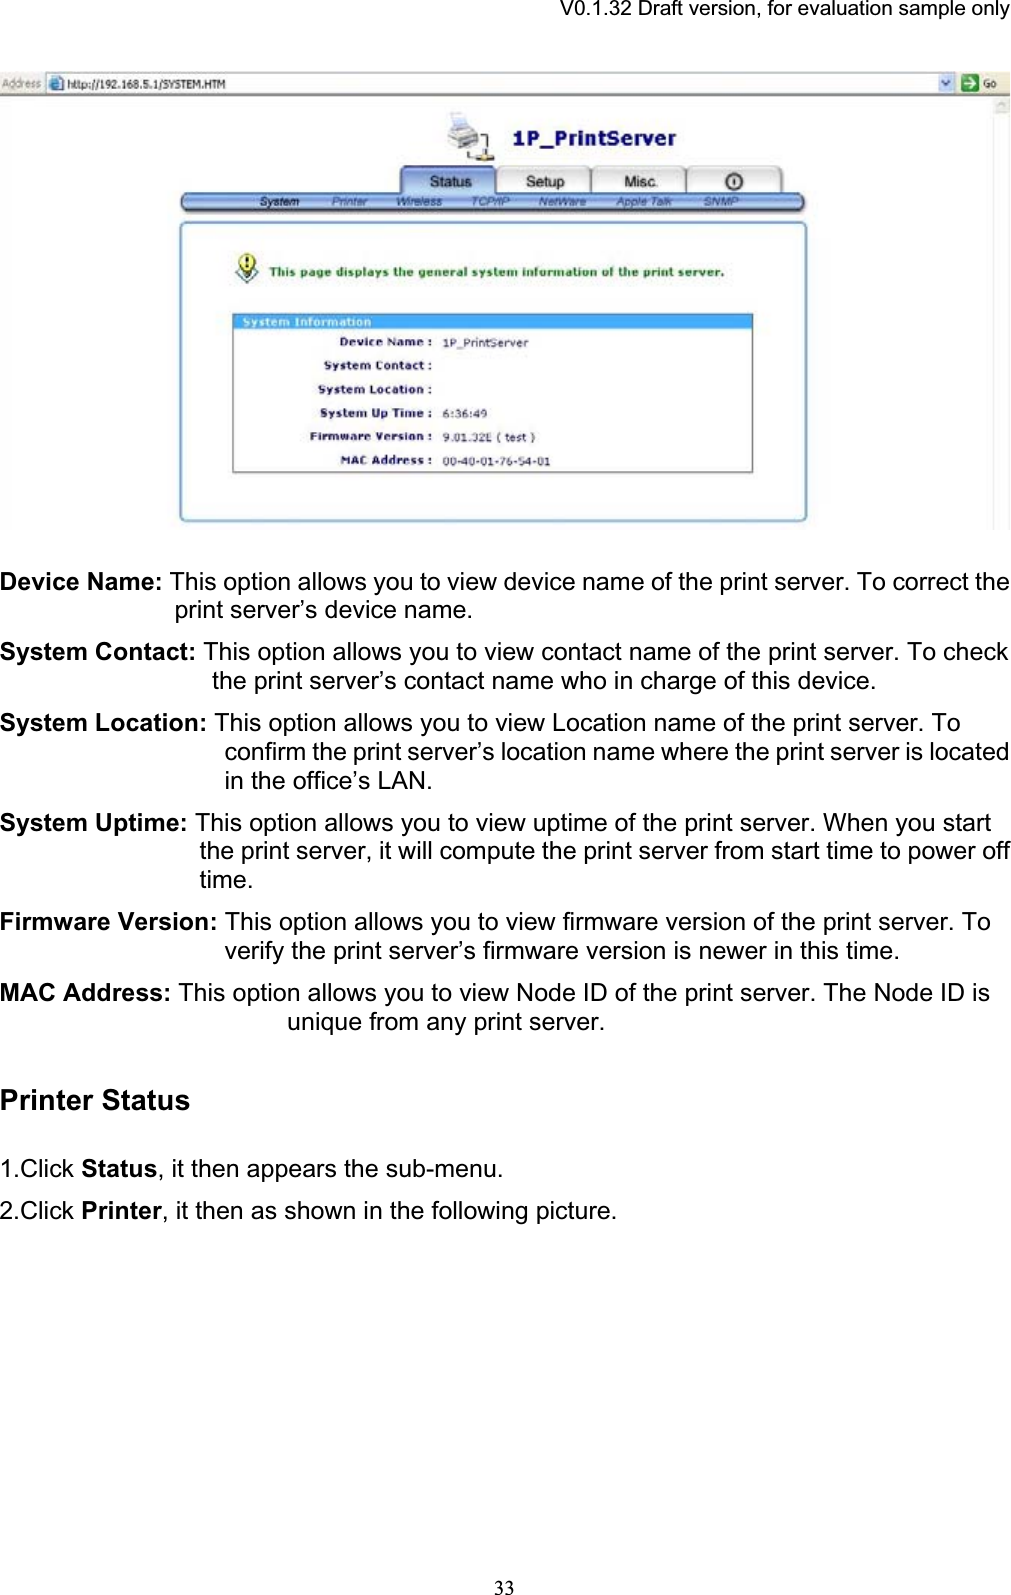 V0.1.32 Draft version, for evaluation sample onlyDevice Name: This option allows you to view device name of the print server. To correct the print server’s device name. System Contact: This option allows you to view contact name of the print server. To check the print server’s contact name who in charge of this device. System Location: This option allows you to view Location name of the print server. To confirm the print server’s location name where the print server is located in the office’s LAN. System Uptime: This option allows you to view uptime of the print server. When you start the print server, it will compute the print server from start time to power off time.Firmware Version: This option allows you to view firmware version of the print server. To verify the print server’s firmware version is newer in this time.MAC Address: This option allows you to view Node ID of the print server. The Node ID is unique from any print server. Printer Status1.Click Status, it then appears the sub-menu. 2.Click Printer, it then as shown in the following picture. 33